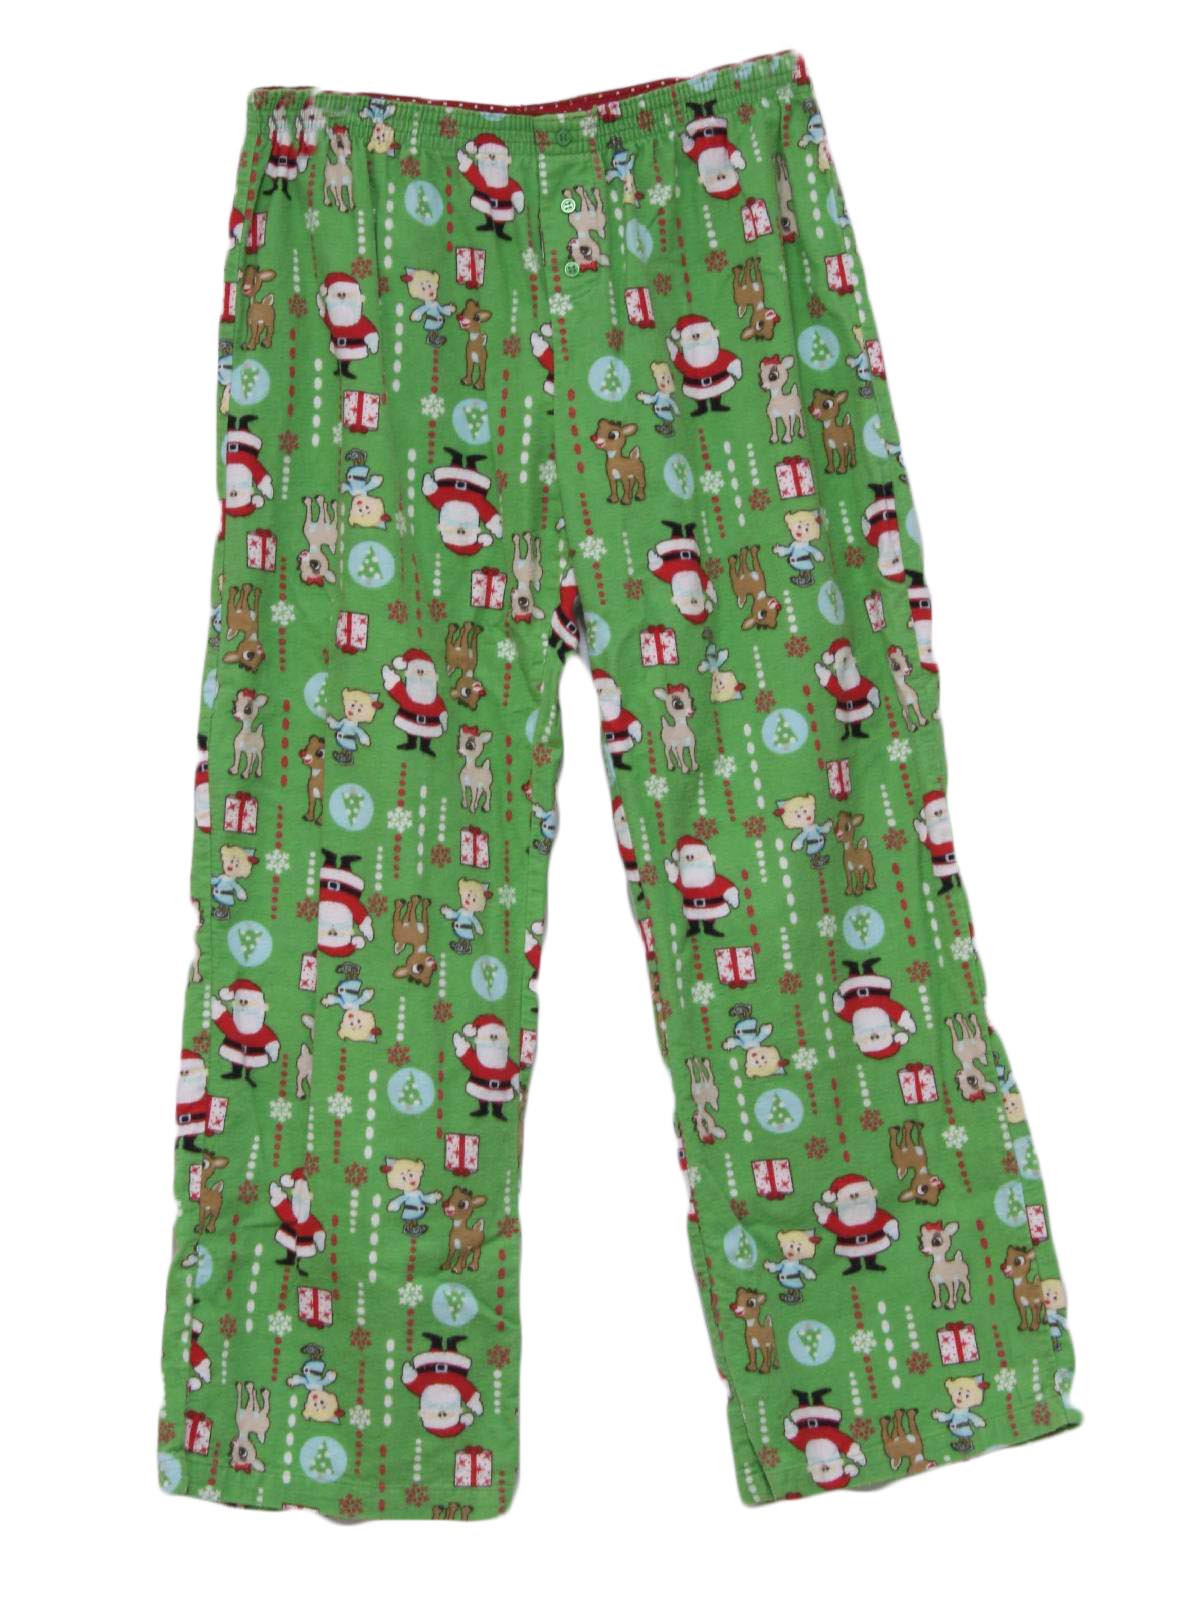 Nineties Accessories - Ugly Christmas Pants to Wear With Your Ugly ...